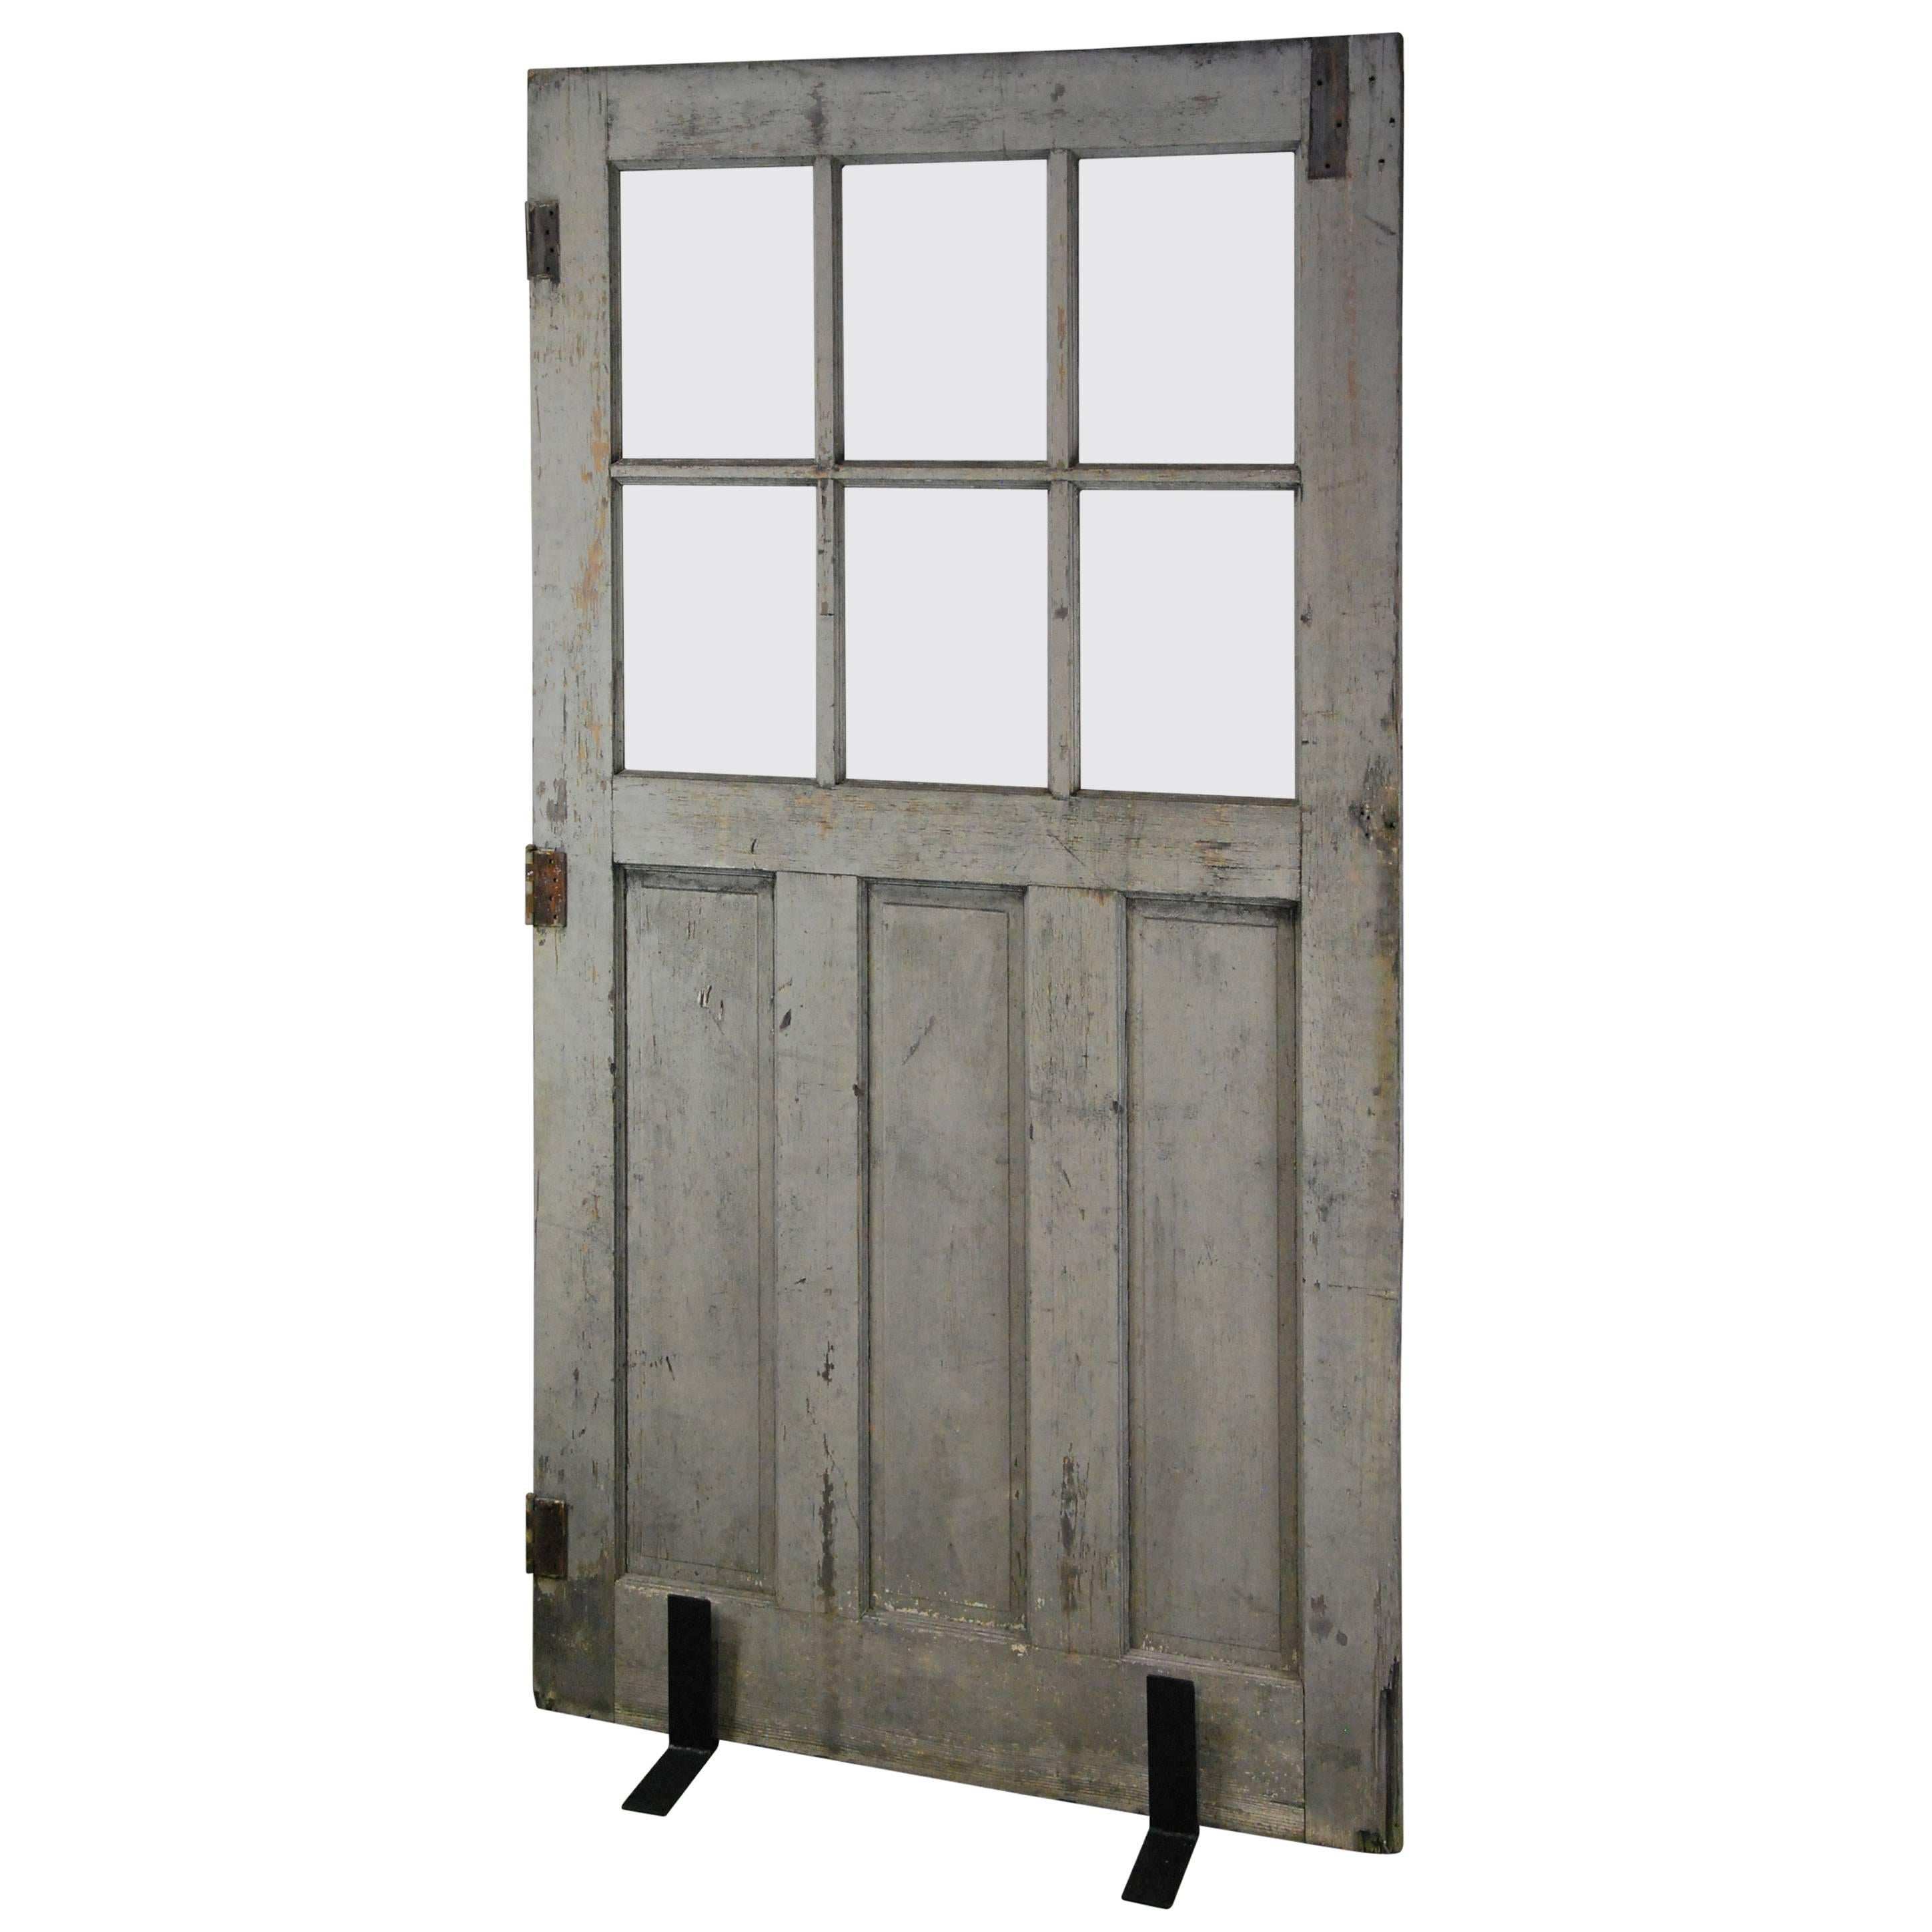 19th Century Wooden Carriage Doors / Track